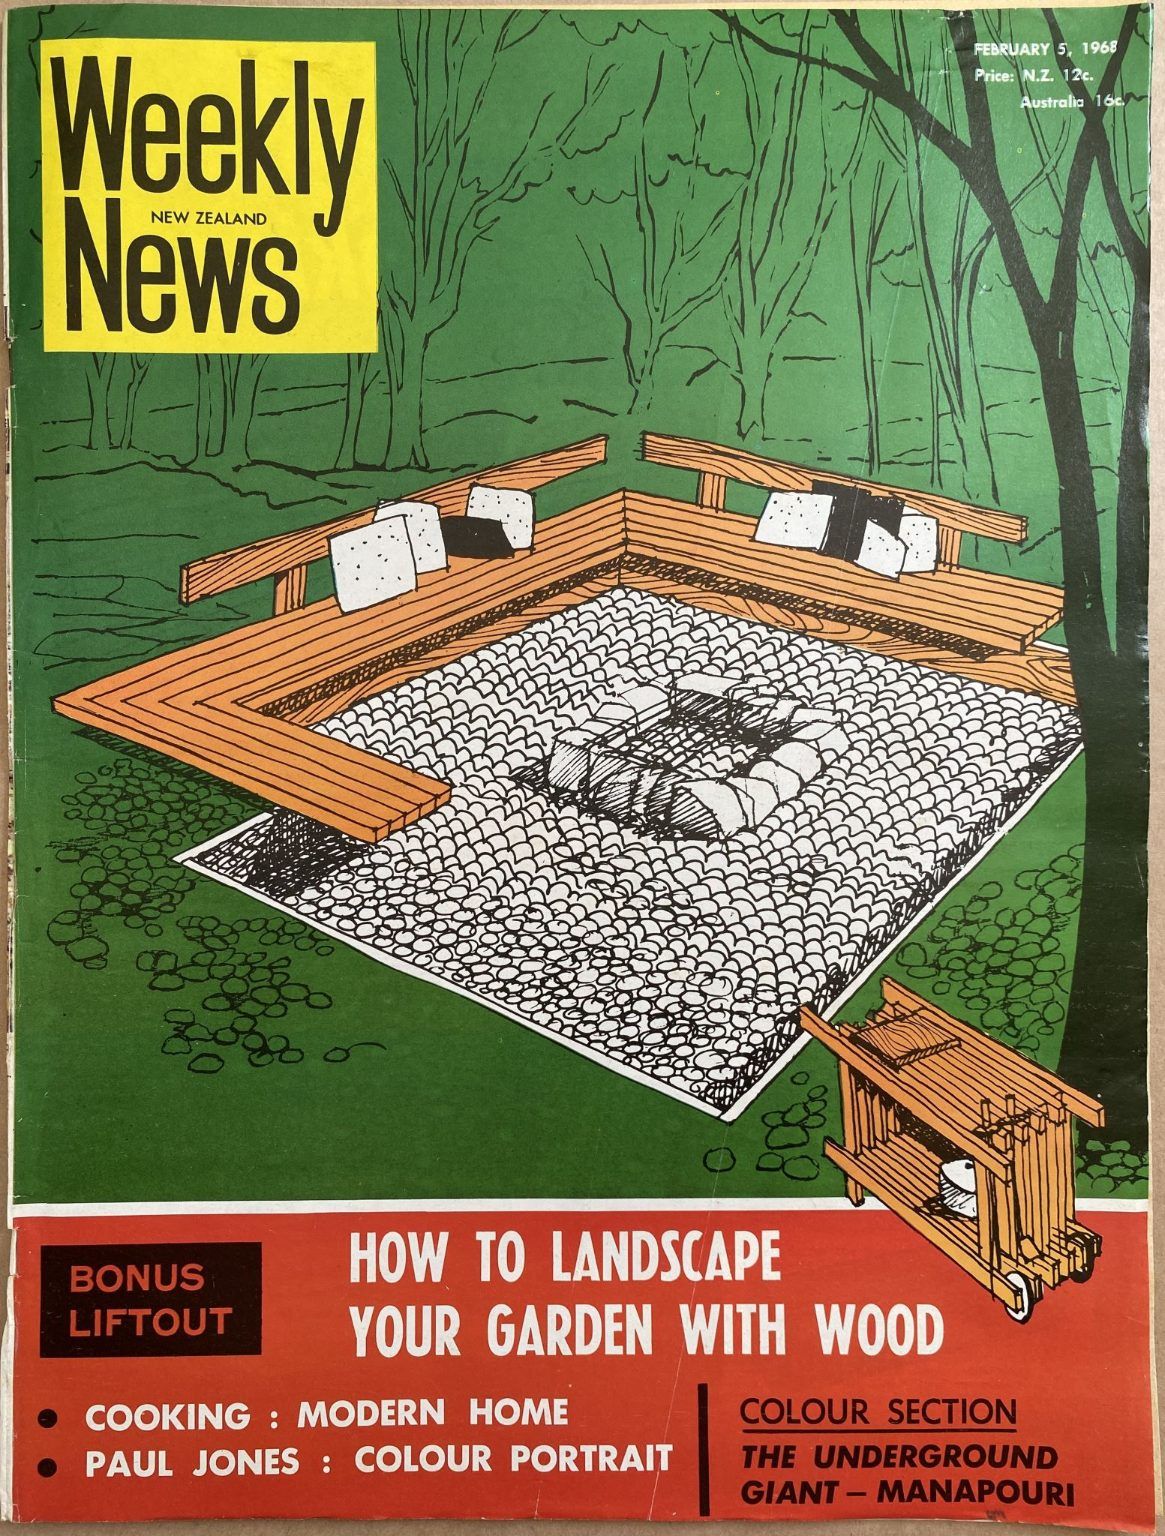 OLD NEWSPAPER: New Zealand Weekly News, No. 5436, 5 February 1968